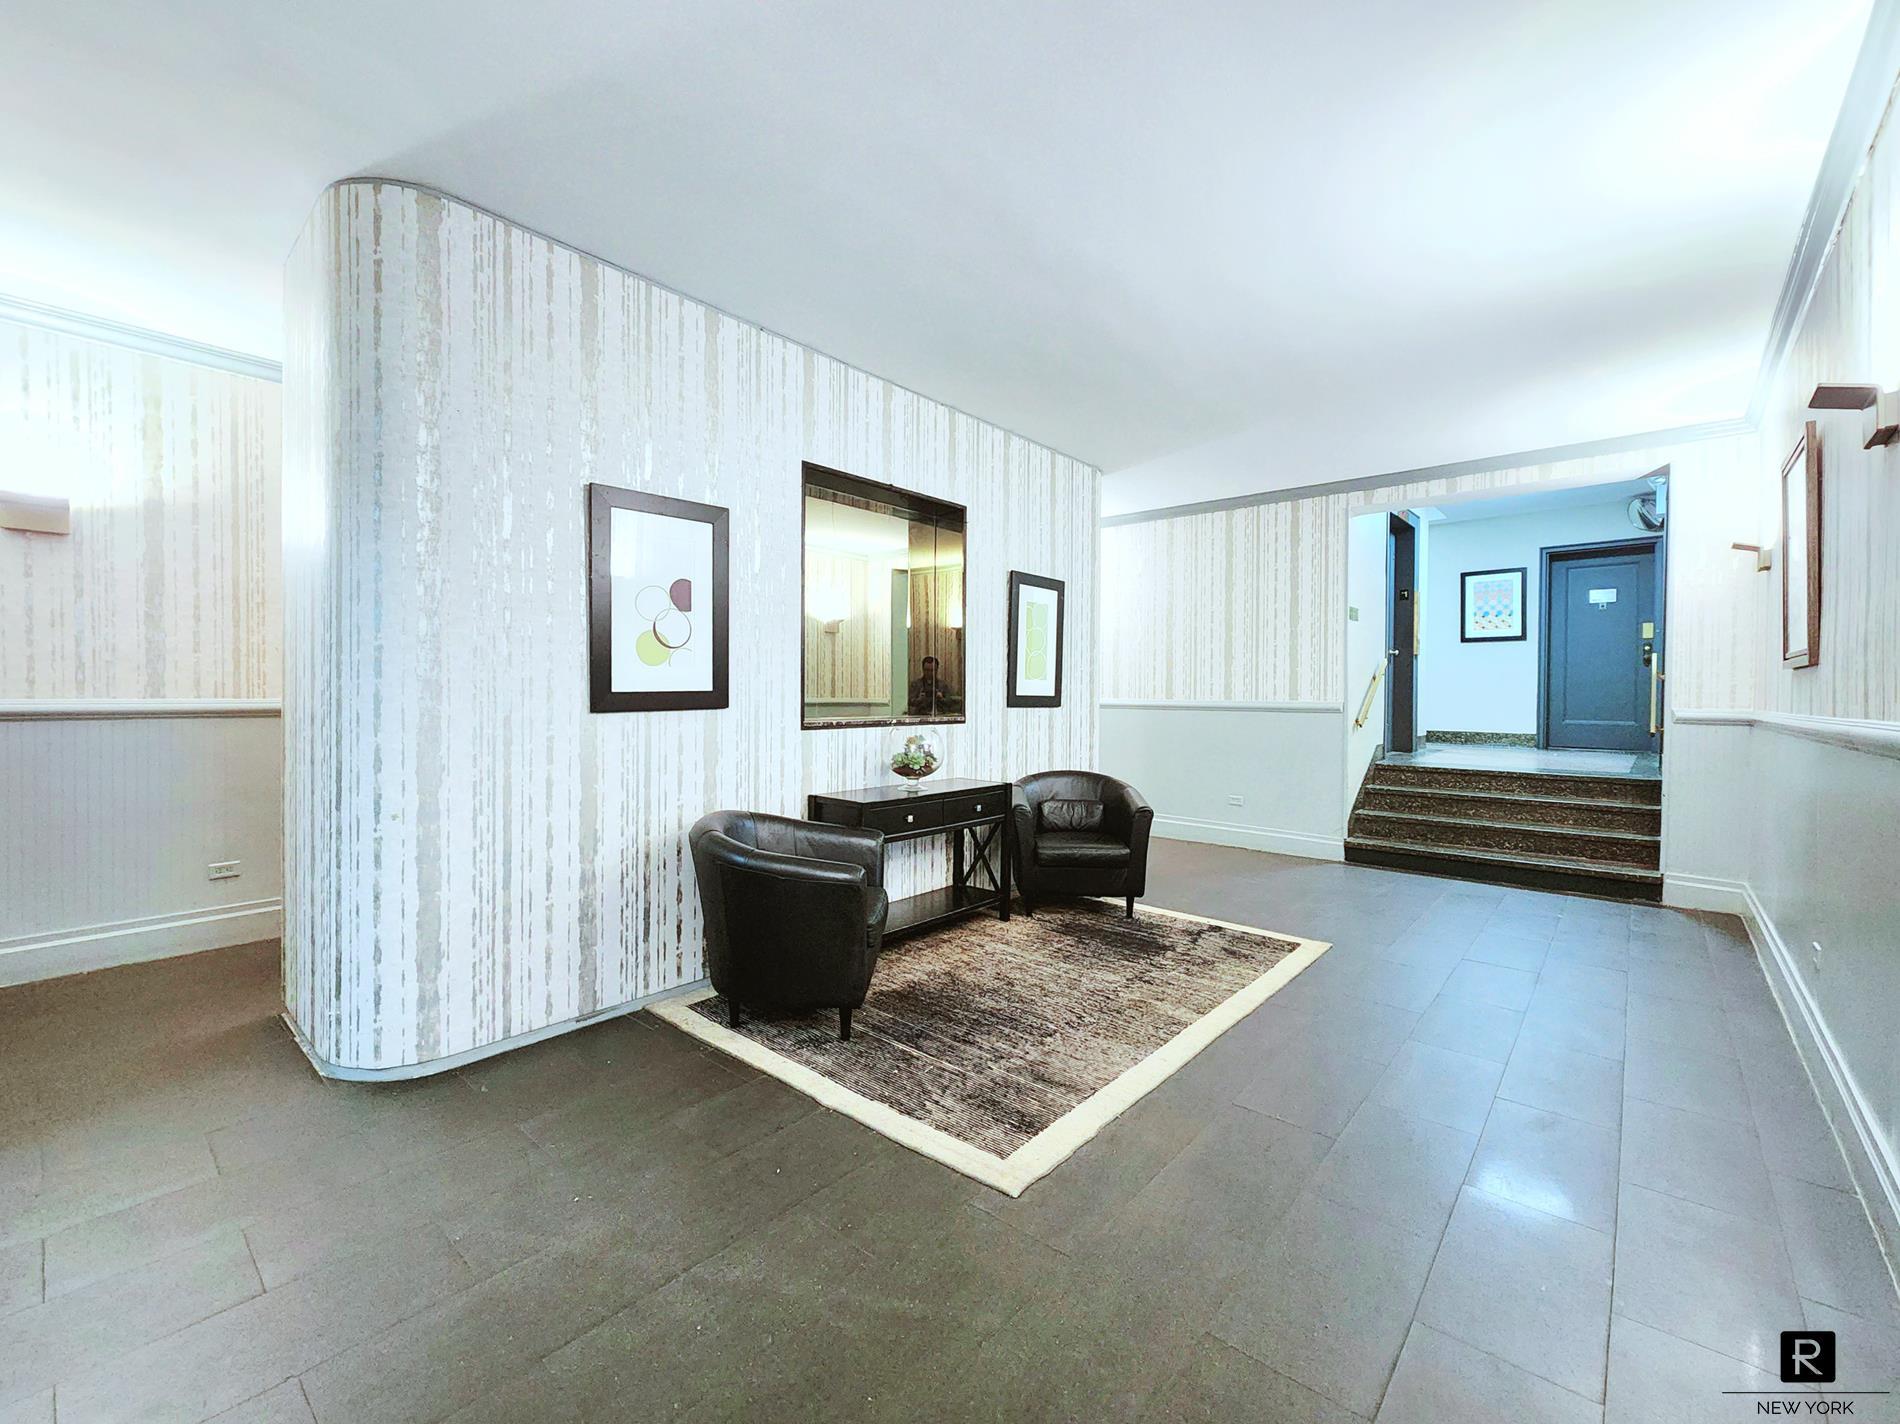 350 East 54th Street Sutton Place New York NY 10022